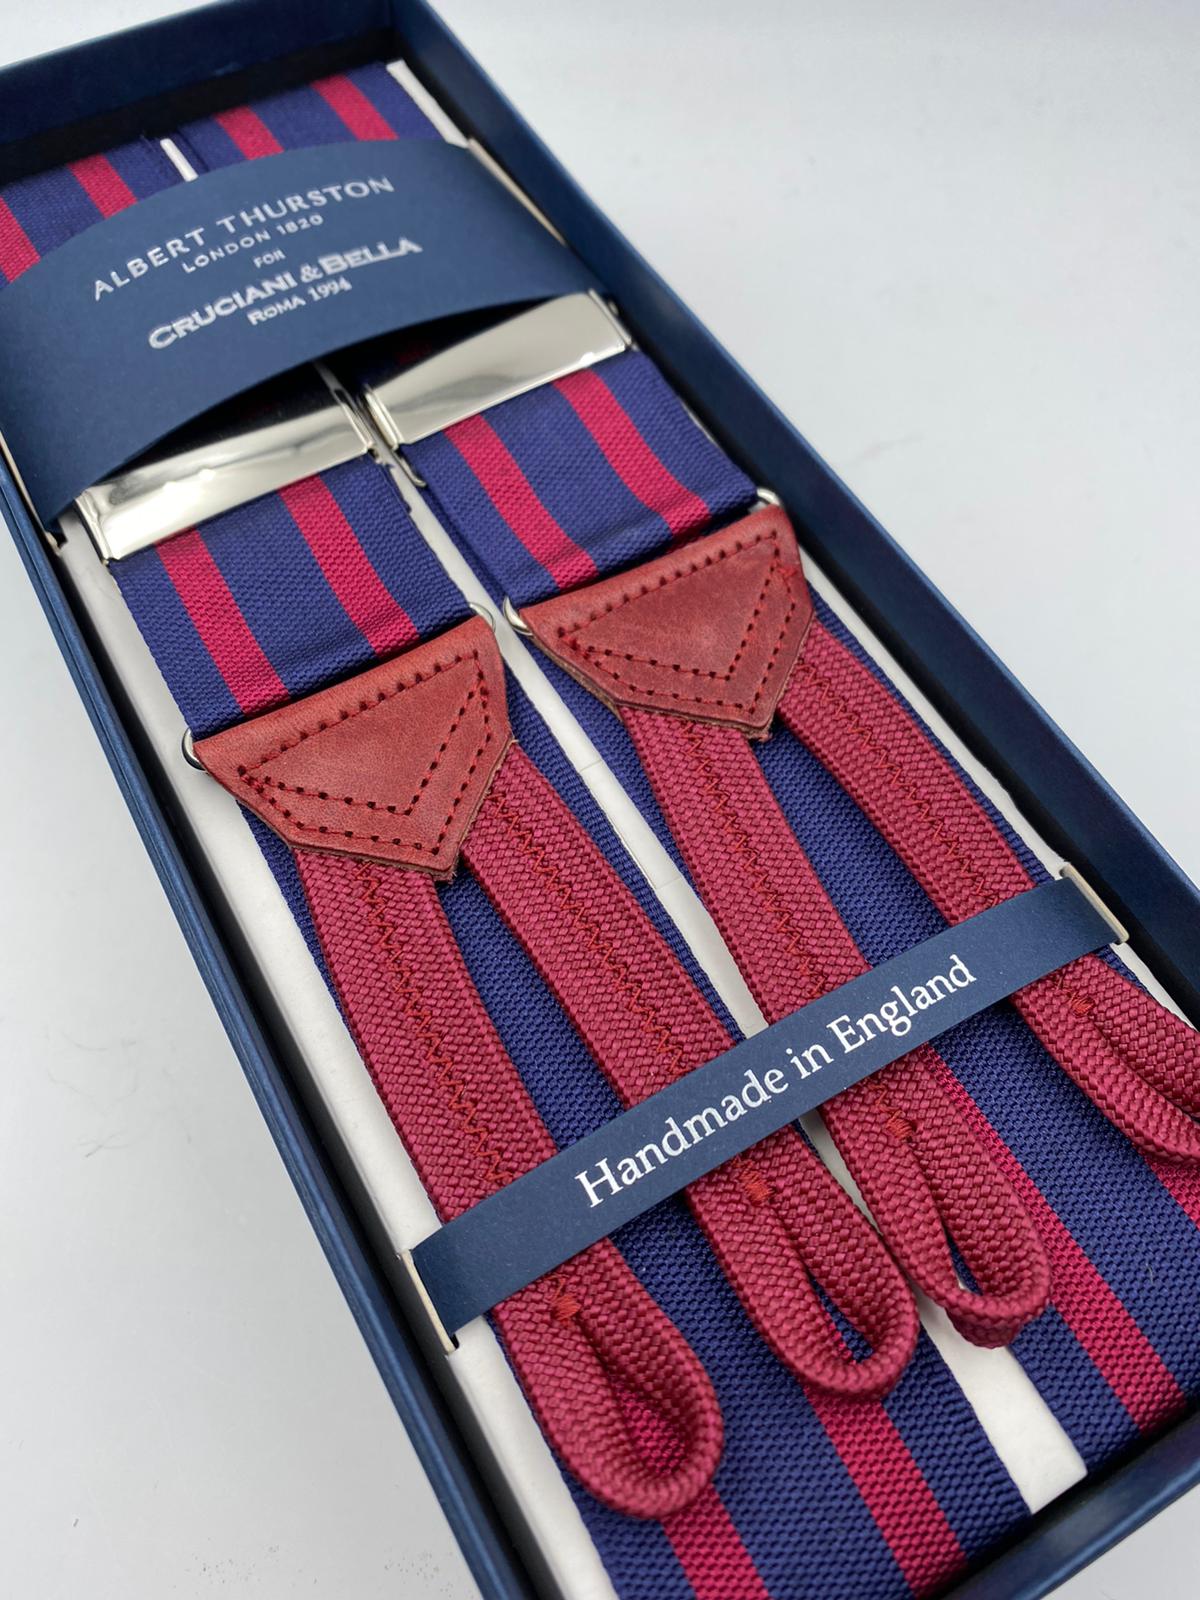 Albert Thurston for Cruciani & Bella Made in England Adjustable Sizing 40 mm Woven Barathea  Blue and Bourgundy Stripes Braces Braid ends Y-Shaped Nickel Fittings Size: XL #5002